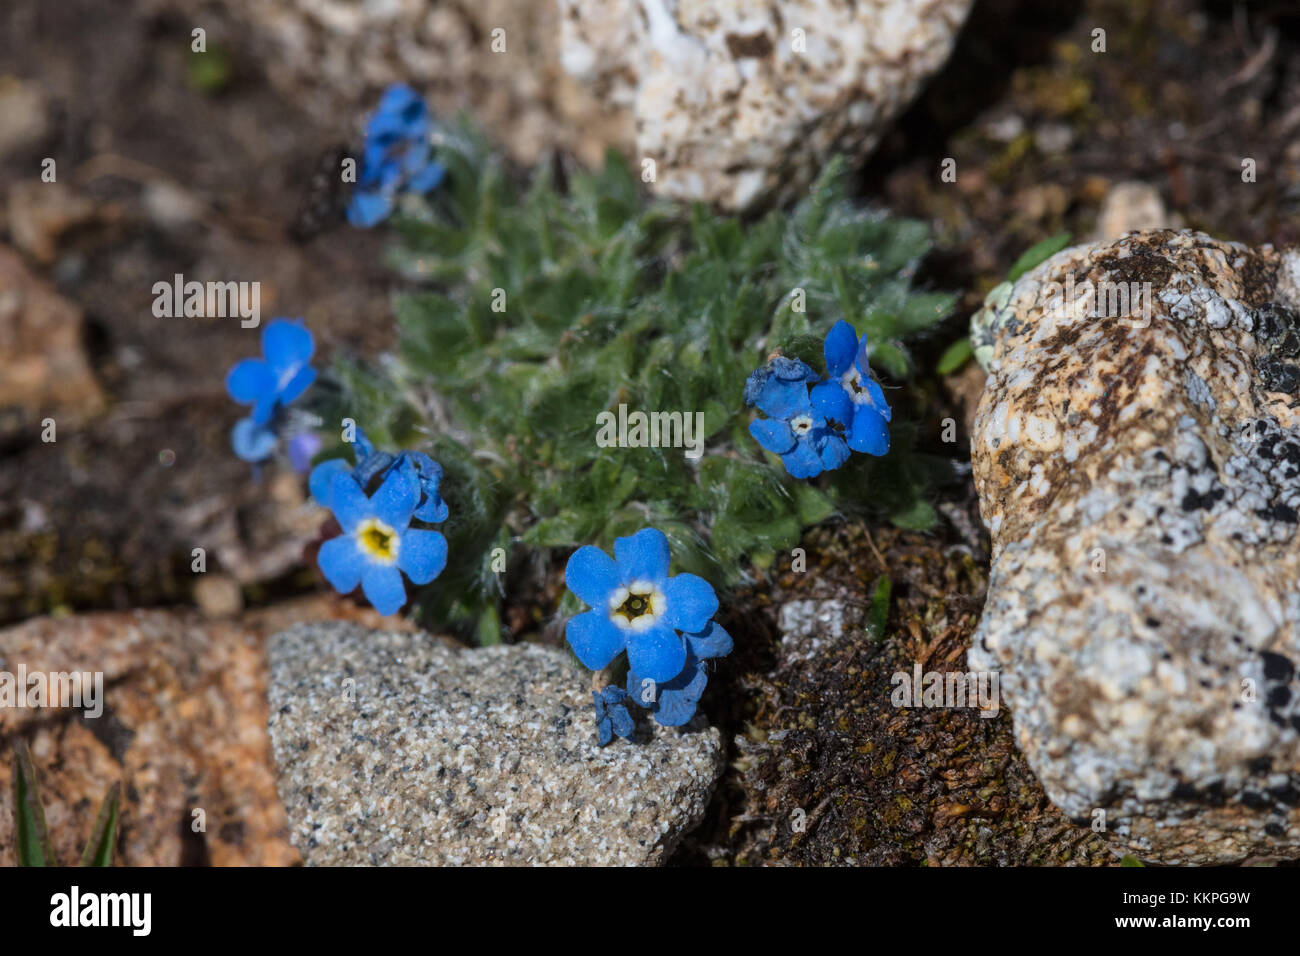 Arctic alpine forget-me-not flowers bloom at the Yellowstone National Park July 15, 2017 in Wyoming.  (photo by Jacob W. Frank via Planetpix) Stock Photo